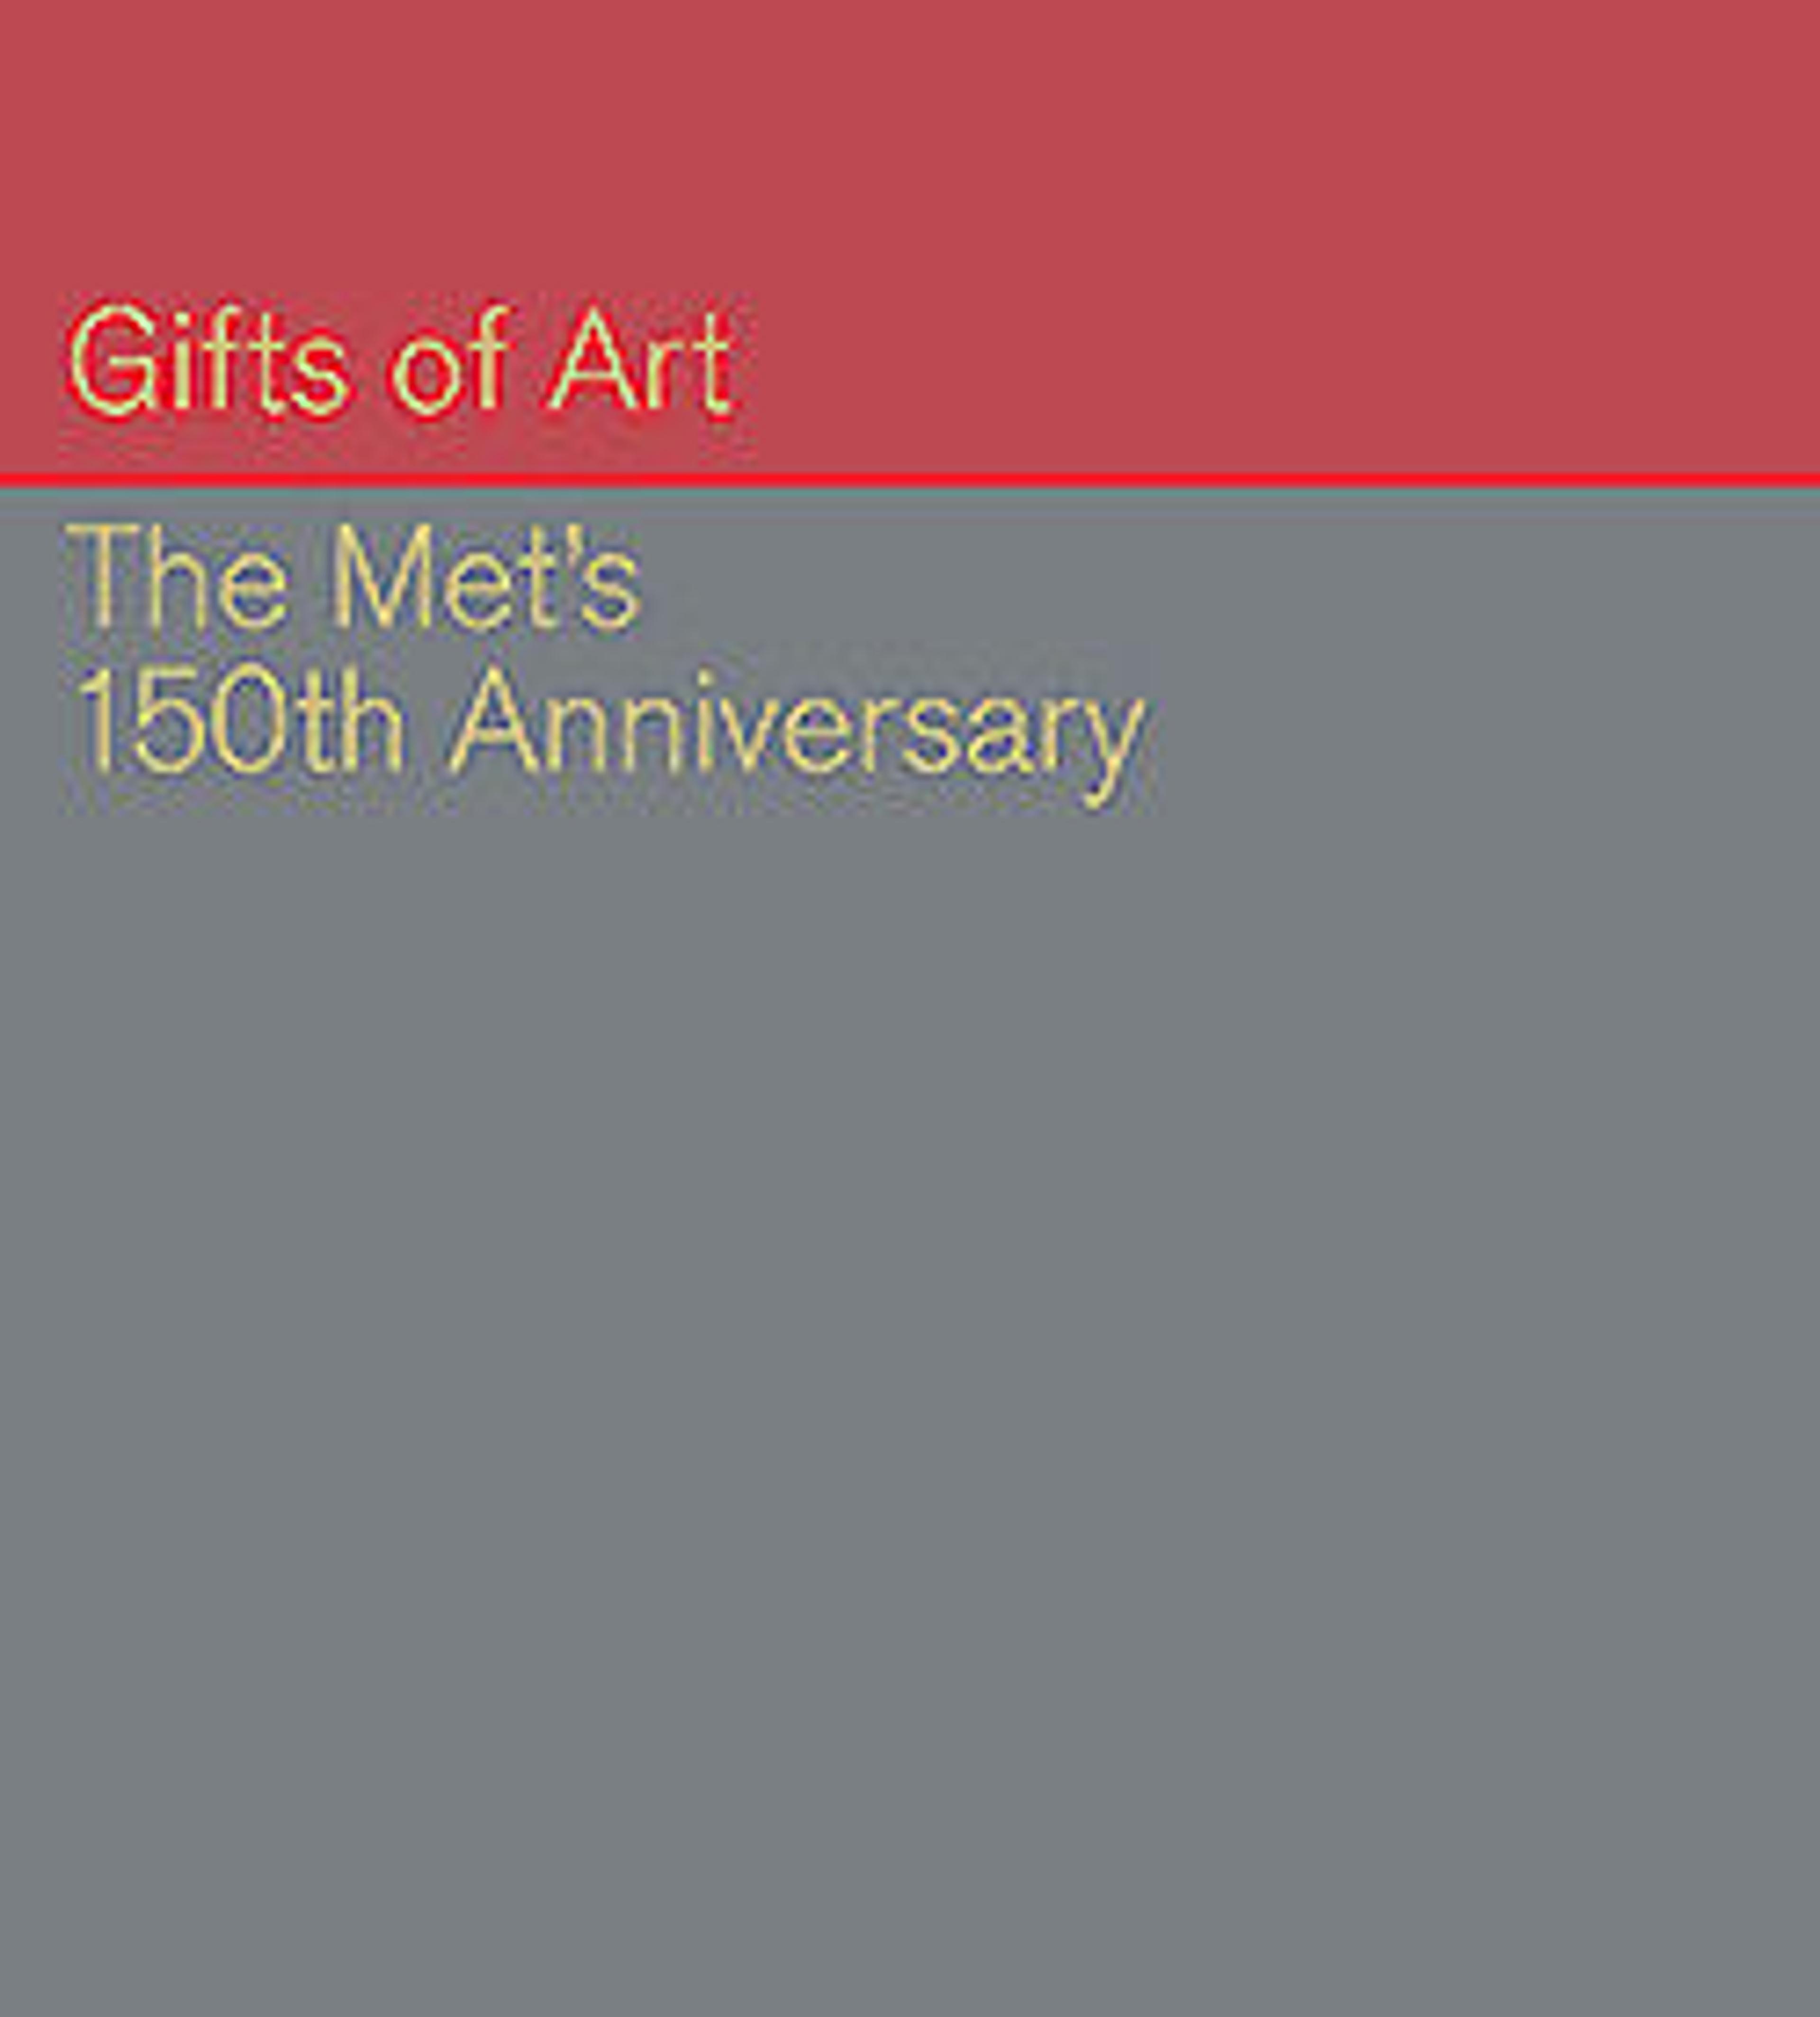 Gifts of Art: The Met's 150th Anniversary